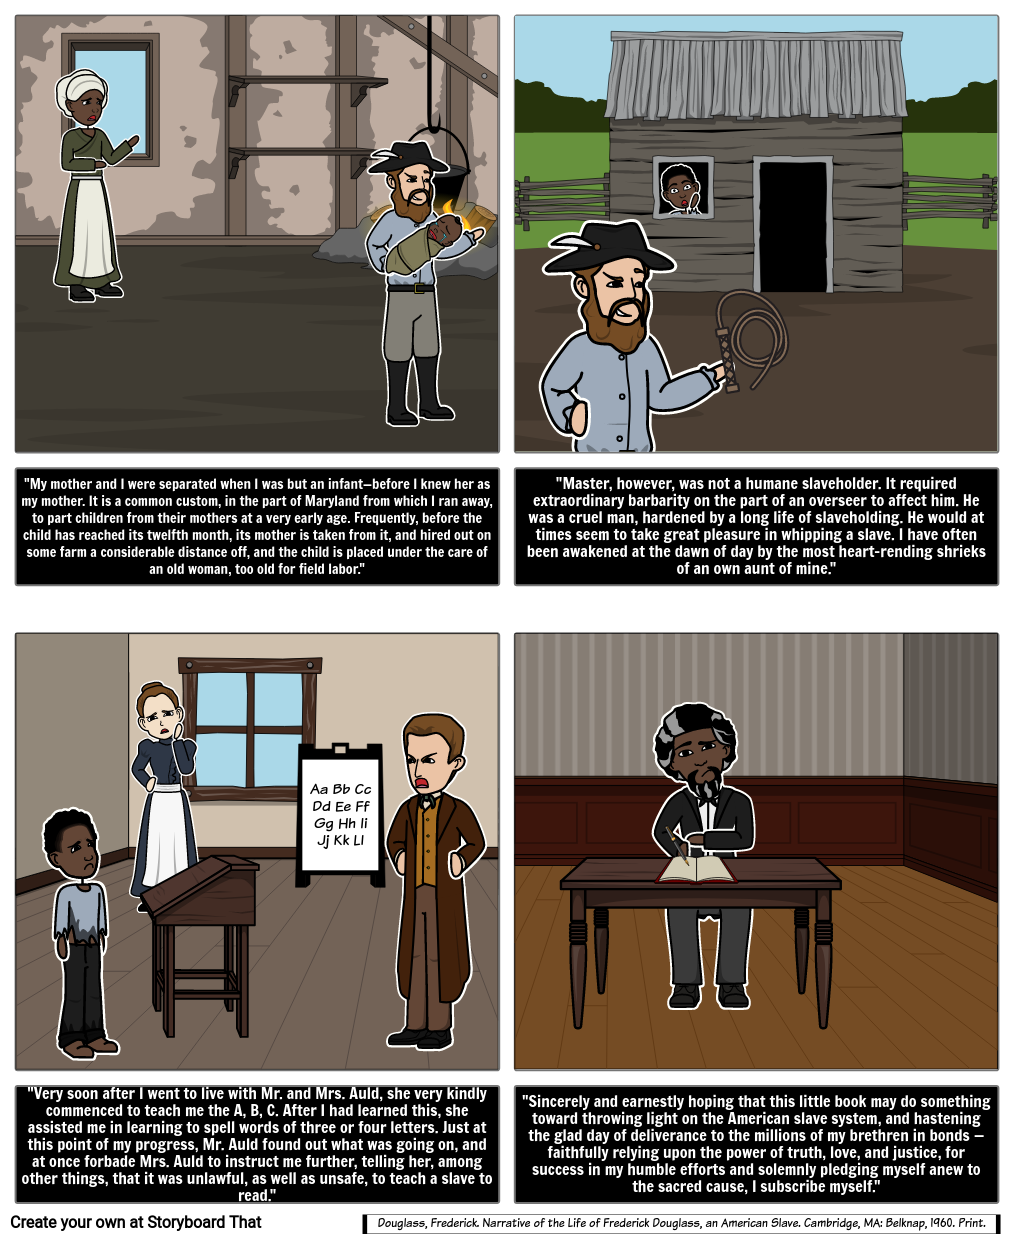 Perspectives of the Slave Trade